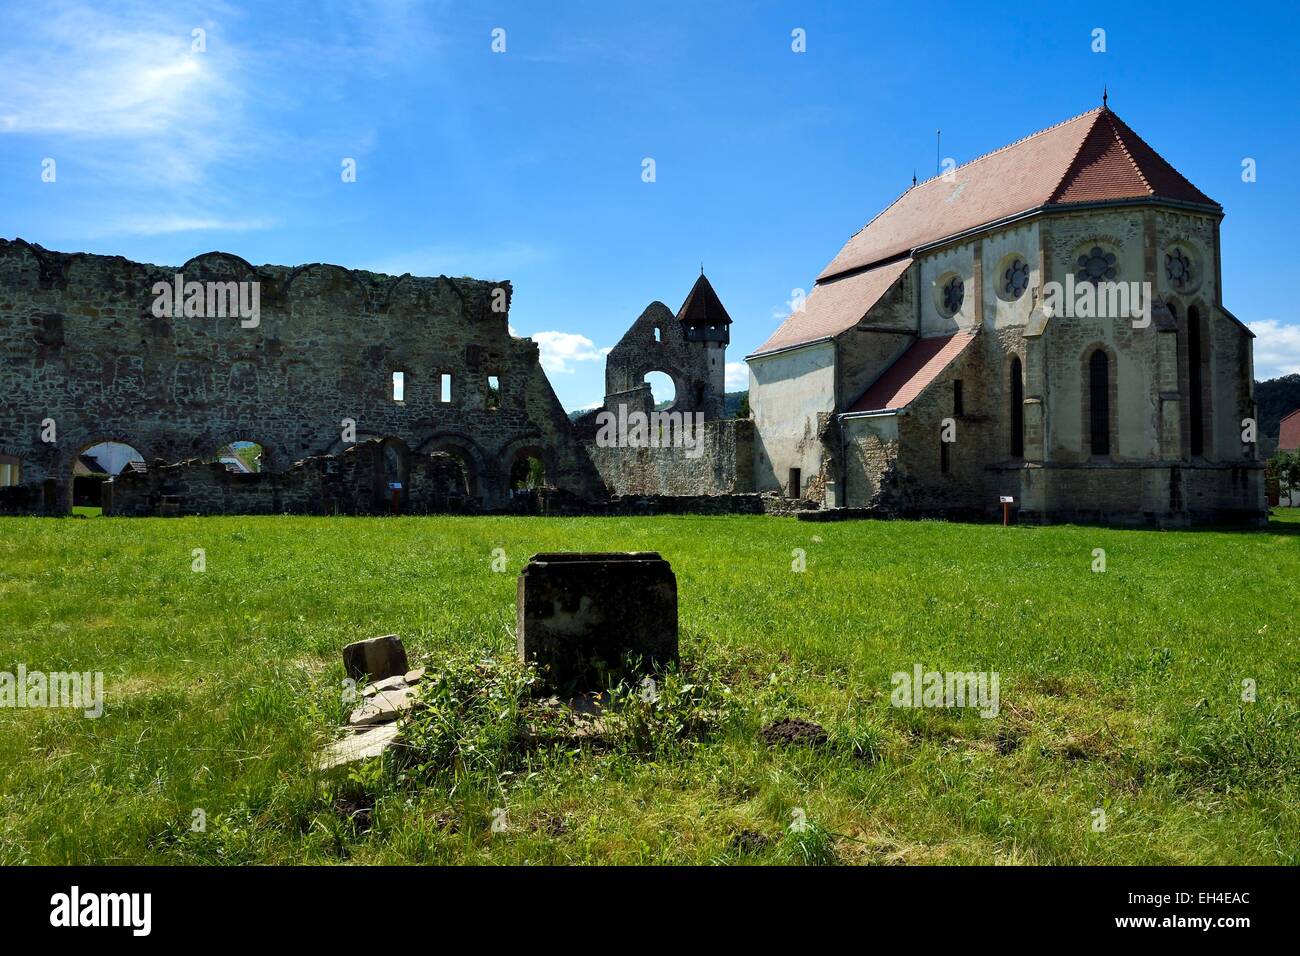 Romania, Transylvania, Sibiu and Fagaras region, Carta, former Cistercian Carta monastery (1205-1474), the ruins of the abbey church was converted into a fortified Lutheran church by the Saxon community Stock Photo